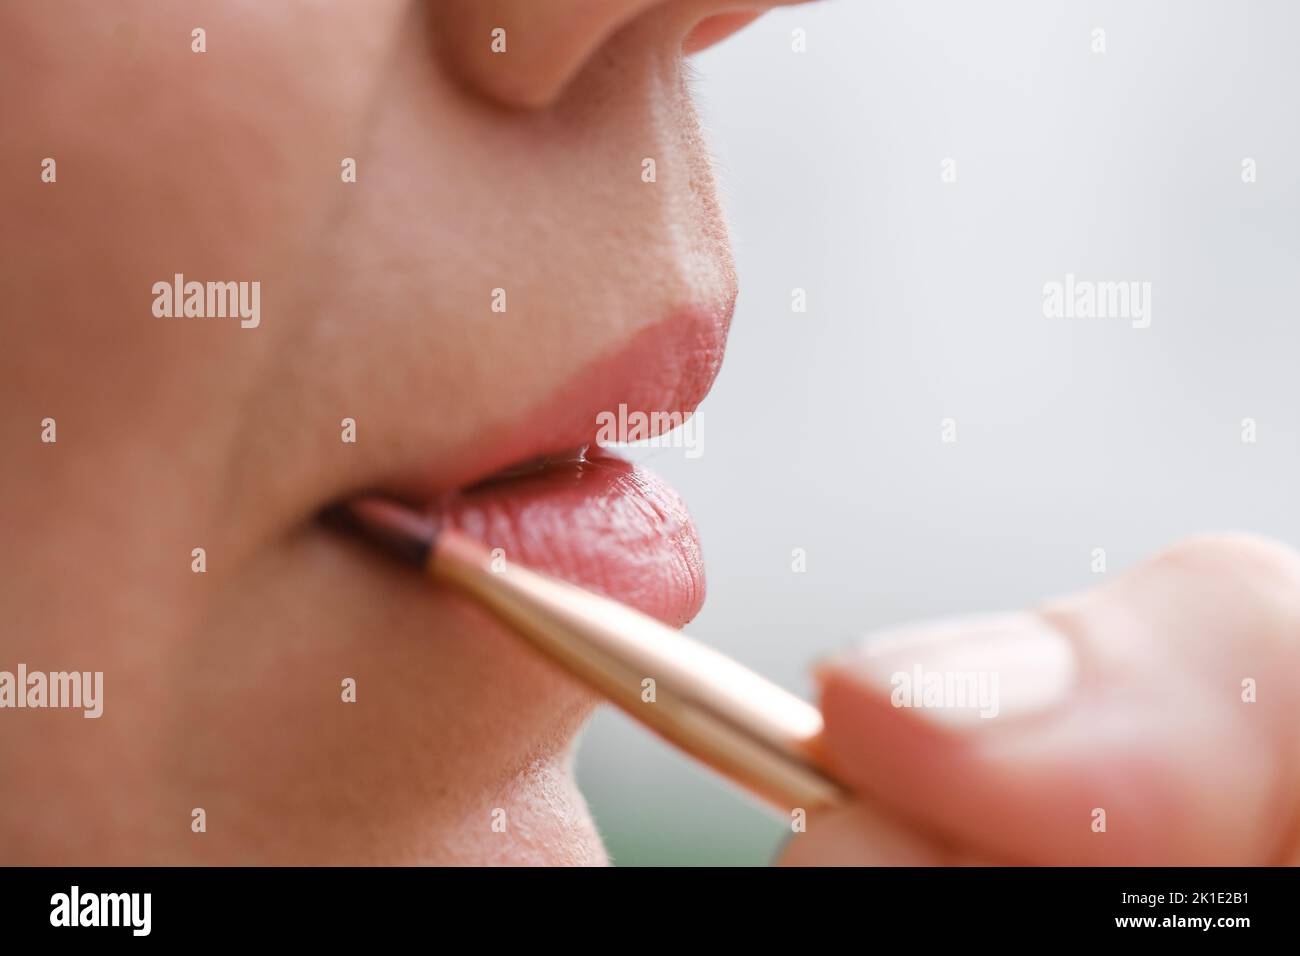 Applying makeup on face, closeup of lips with brush and contour pencil. Professional Make-up. Lipstick Copy space. Real people natural lips detail Stock Photo